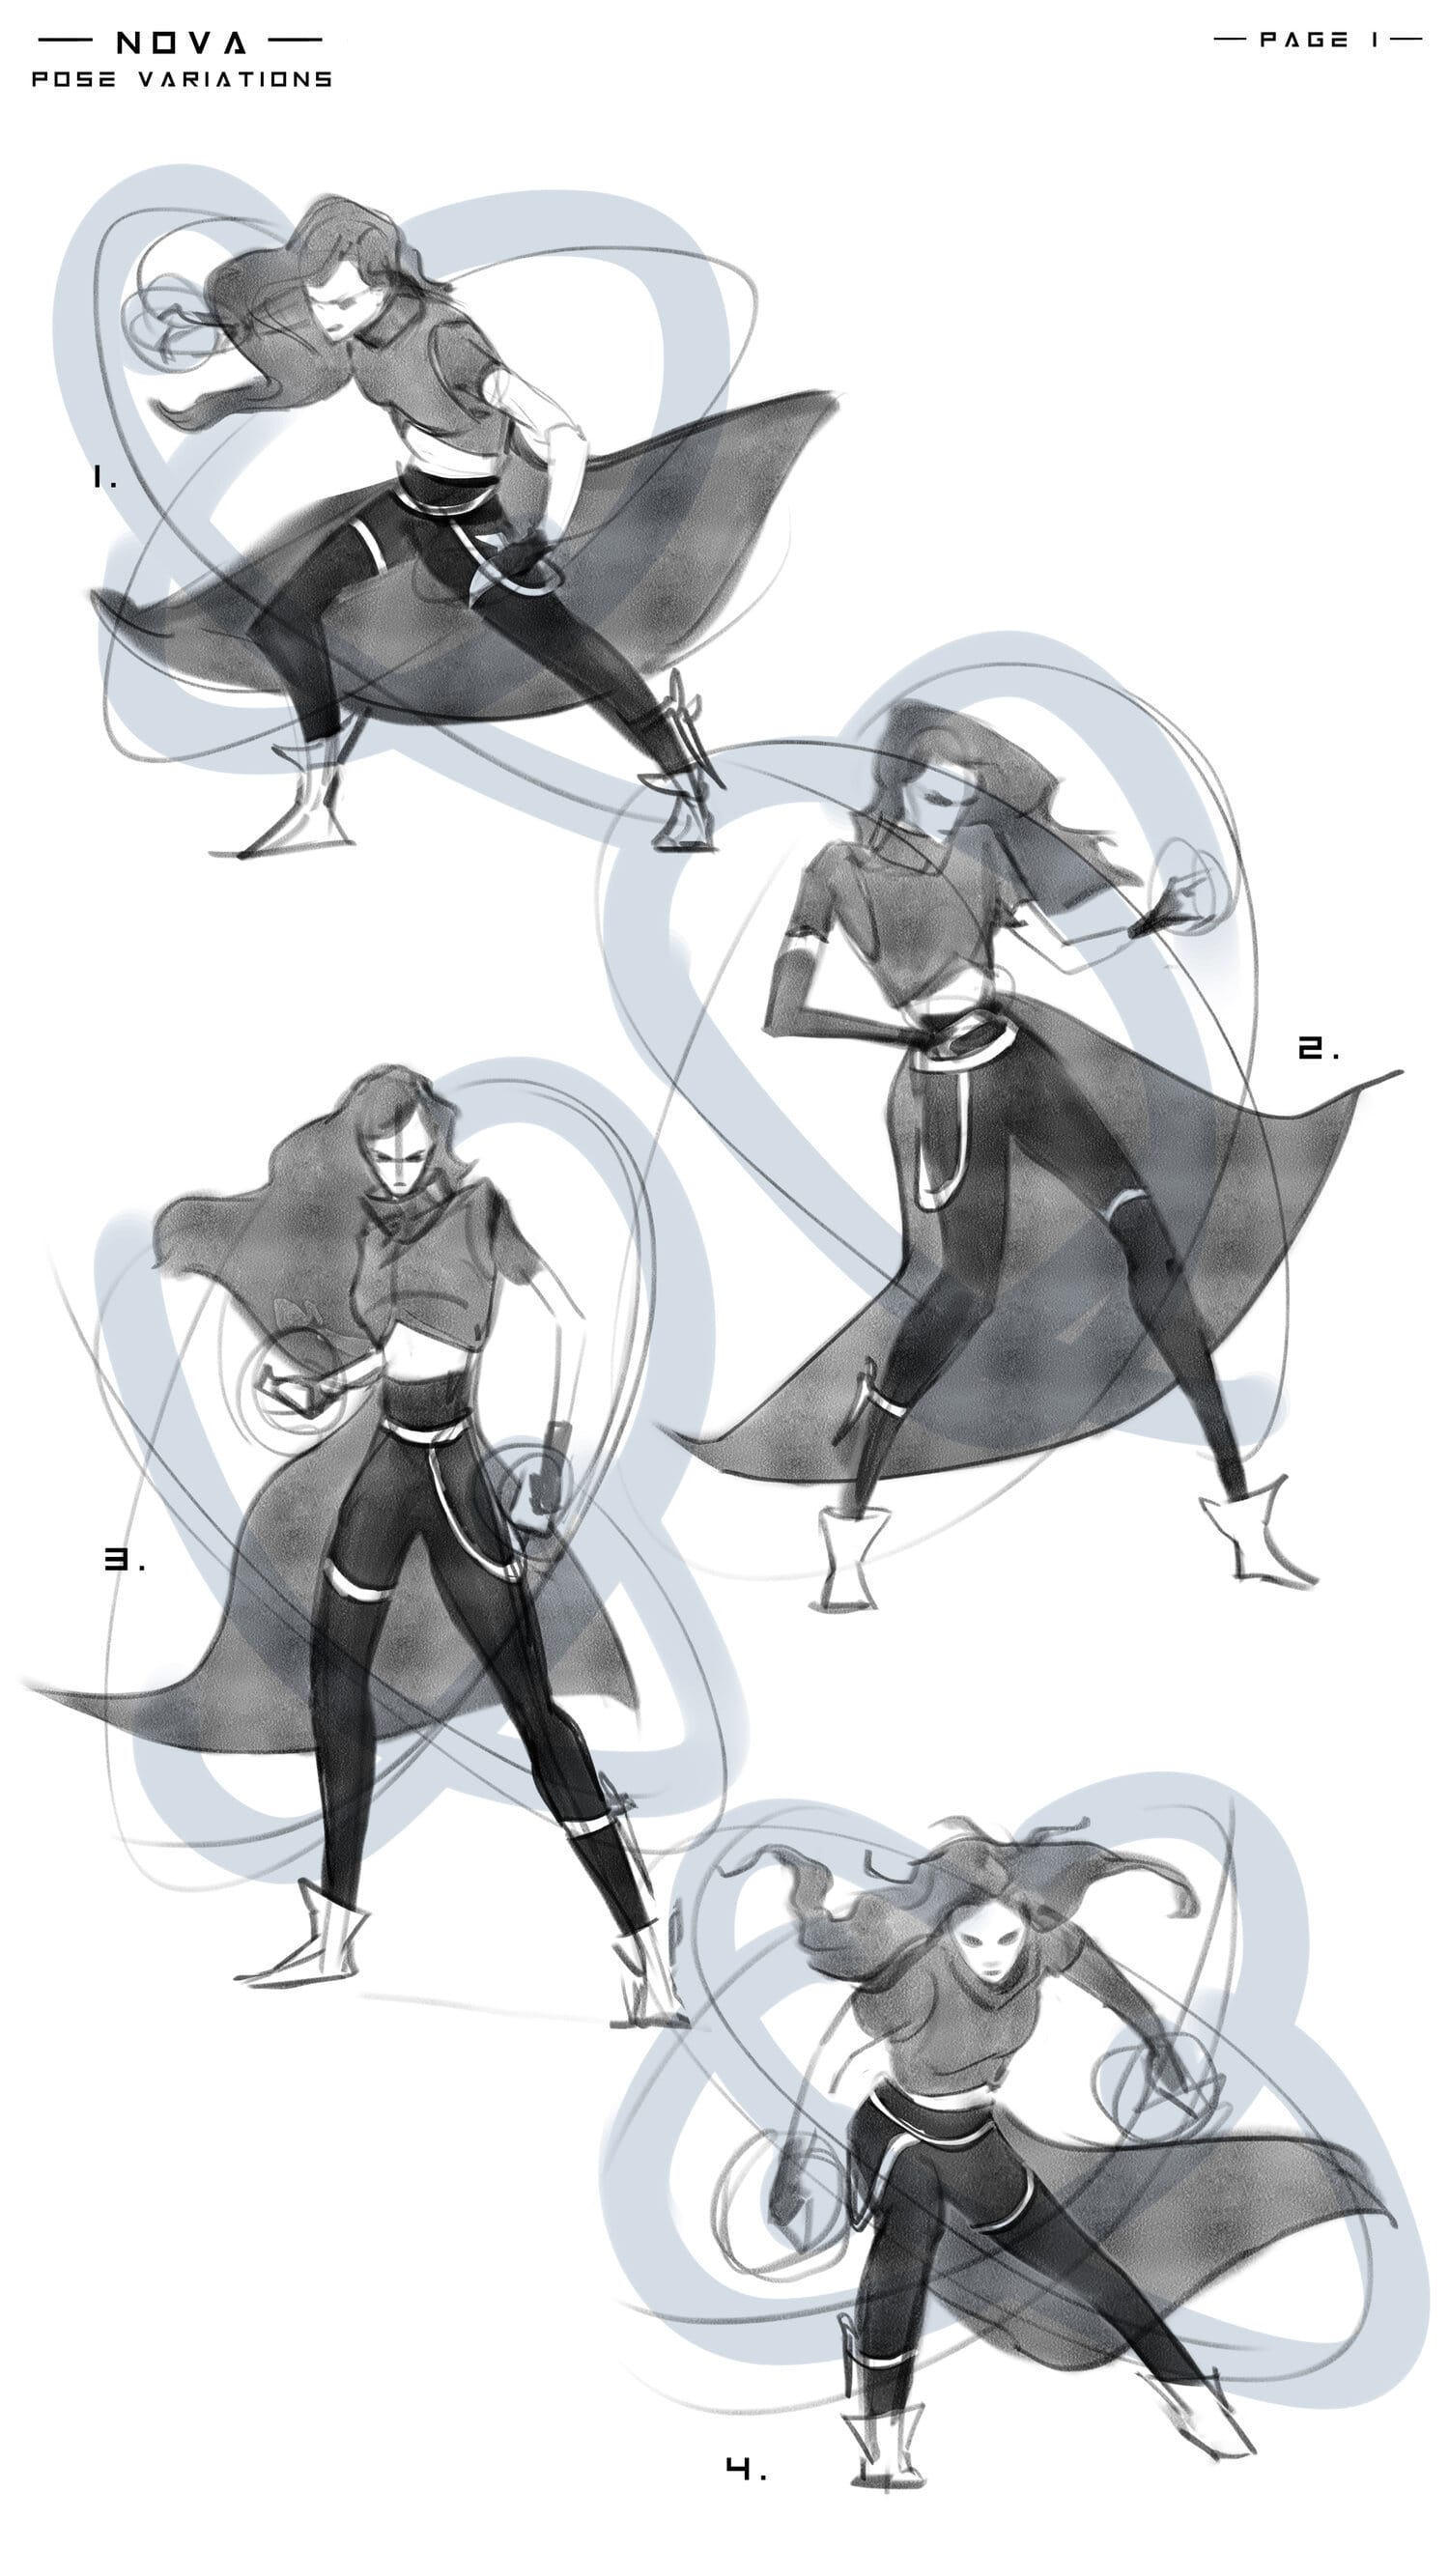 sketches of poses